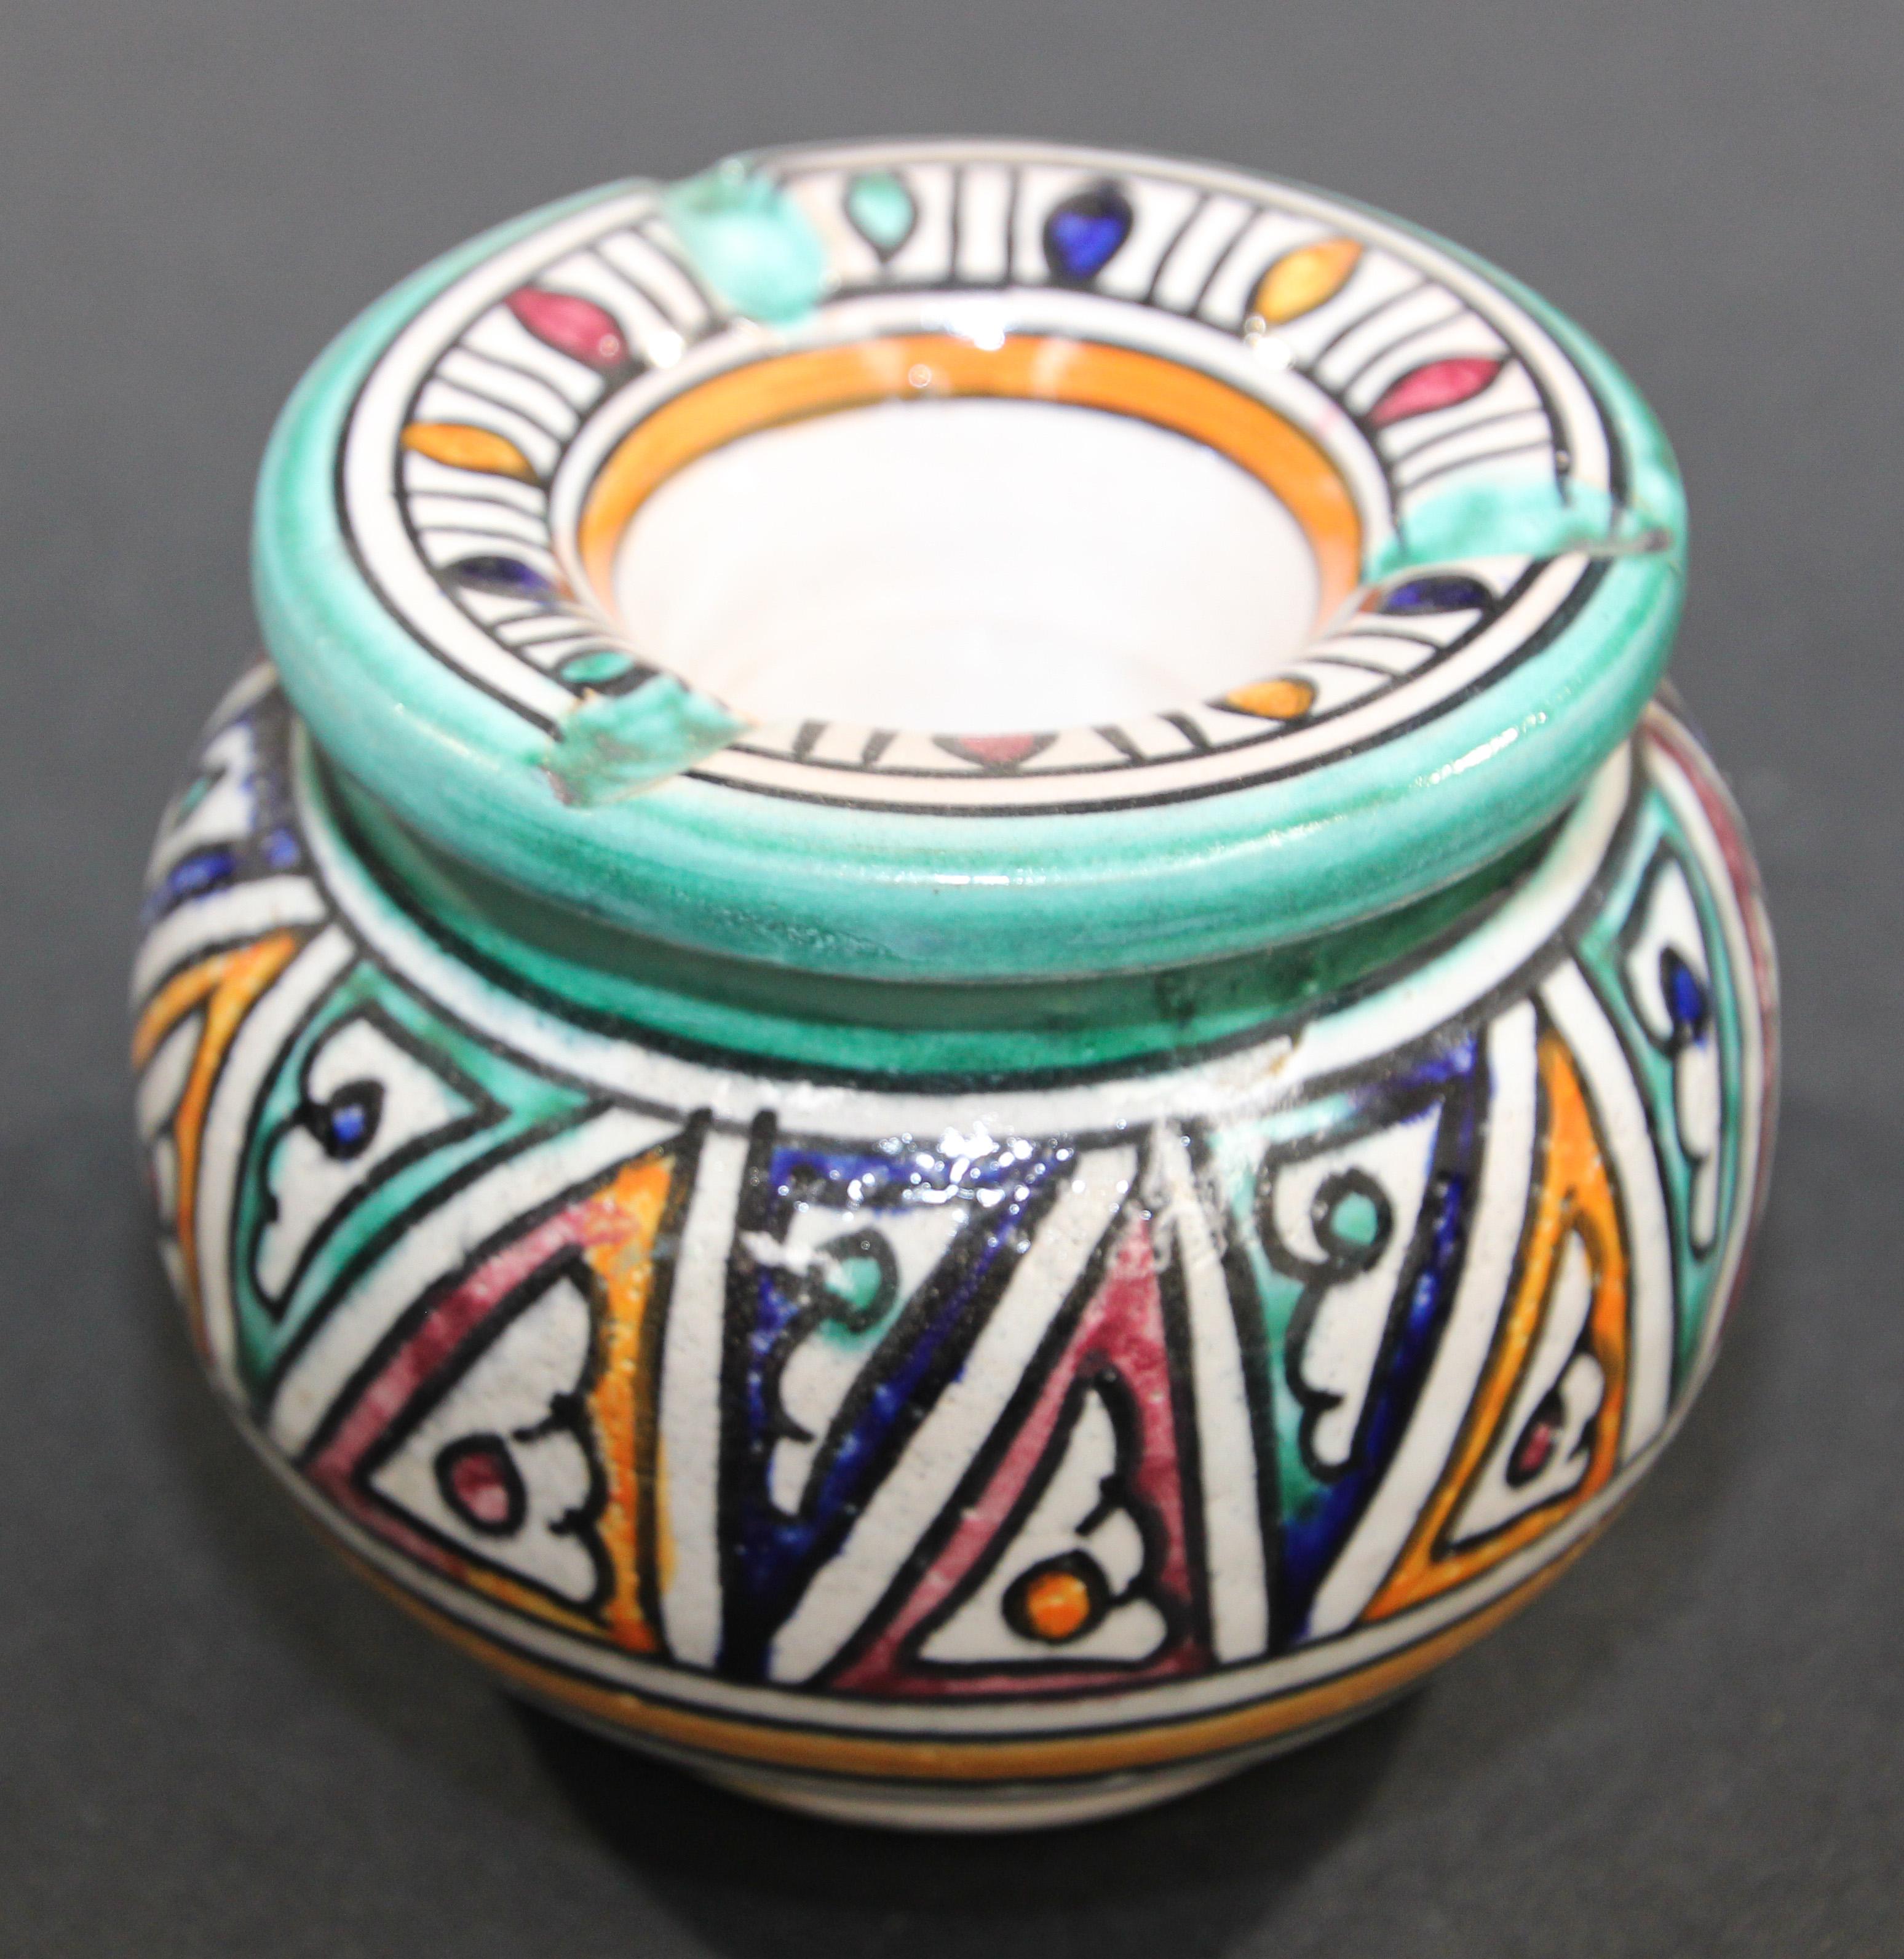 Moroccan covered hand painted ceramic ashtray.
Handcrafted Moroccan ceramic covered ash receiver.
This covered medium size ashtray could be used indoor and outdoor.
If used indoor the cover will keep the smell of ashes in.
Hand painted Moorish